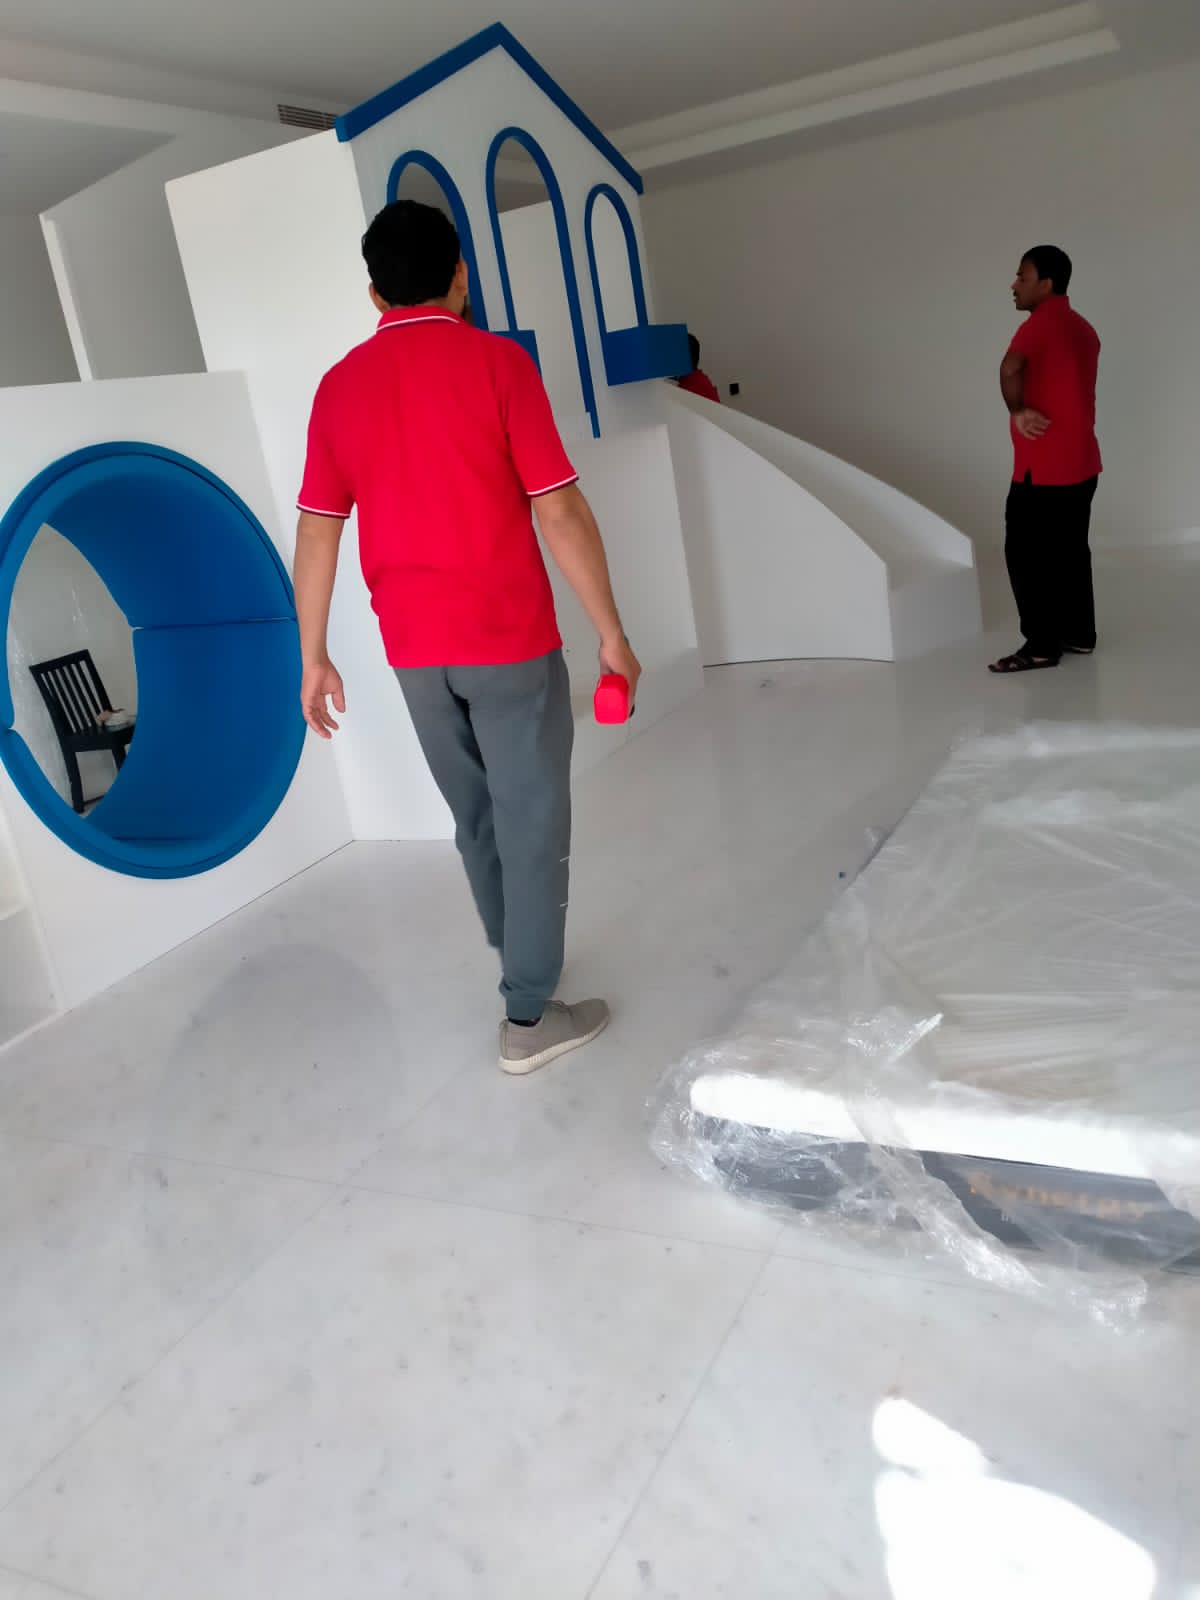 Movers and Packers Bur Dubai